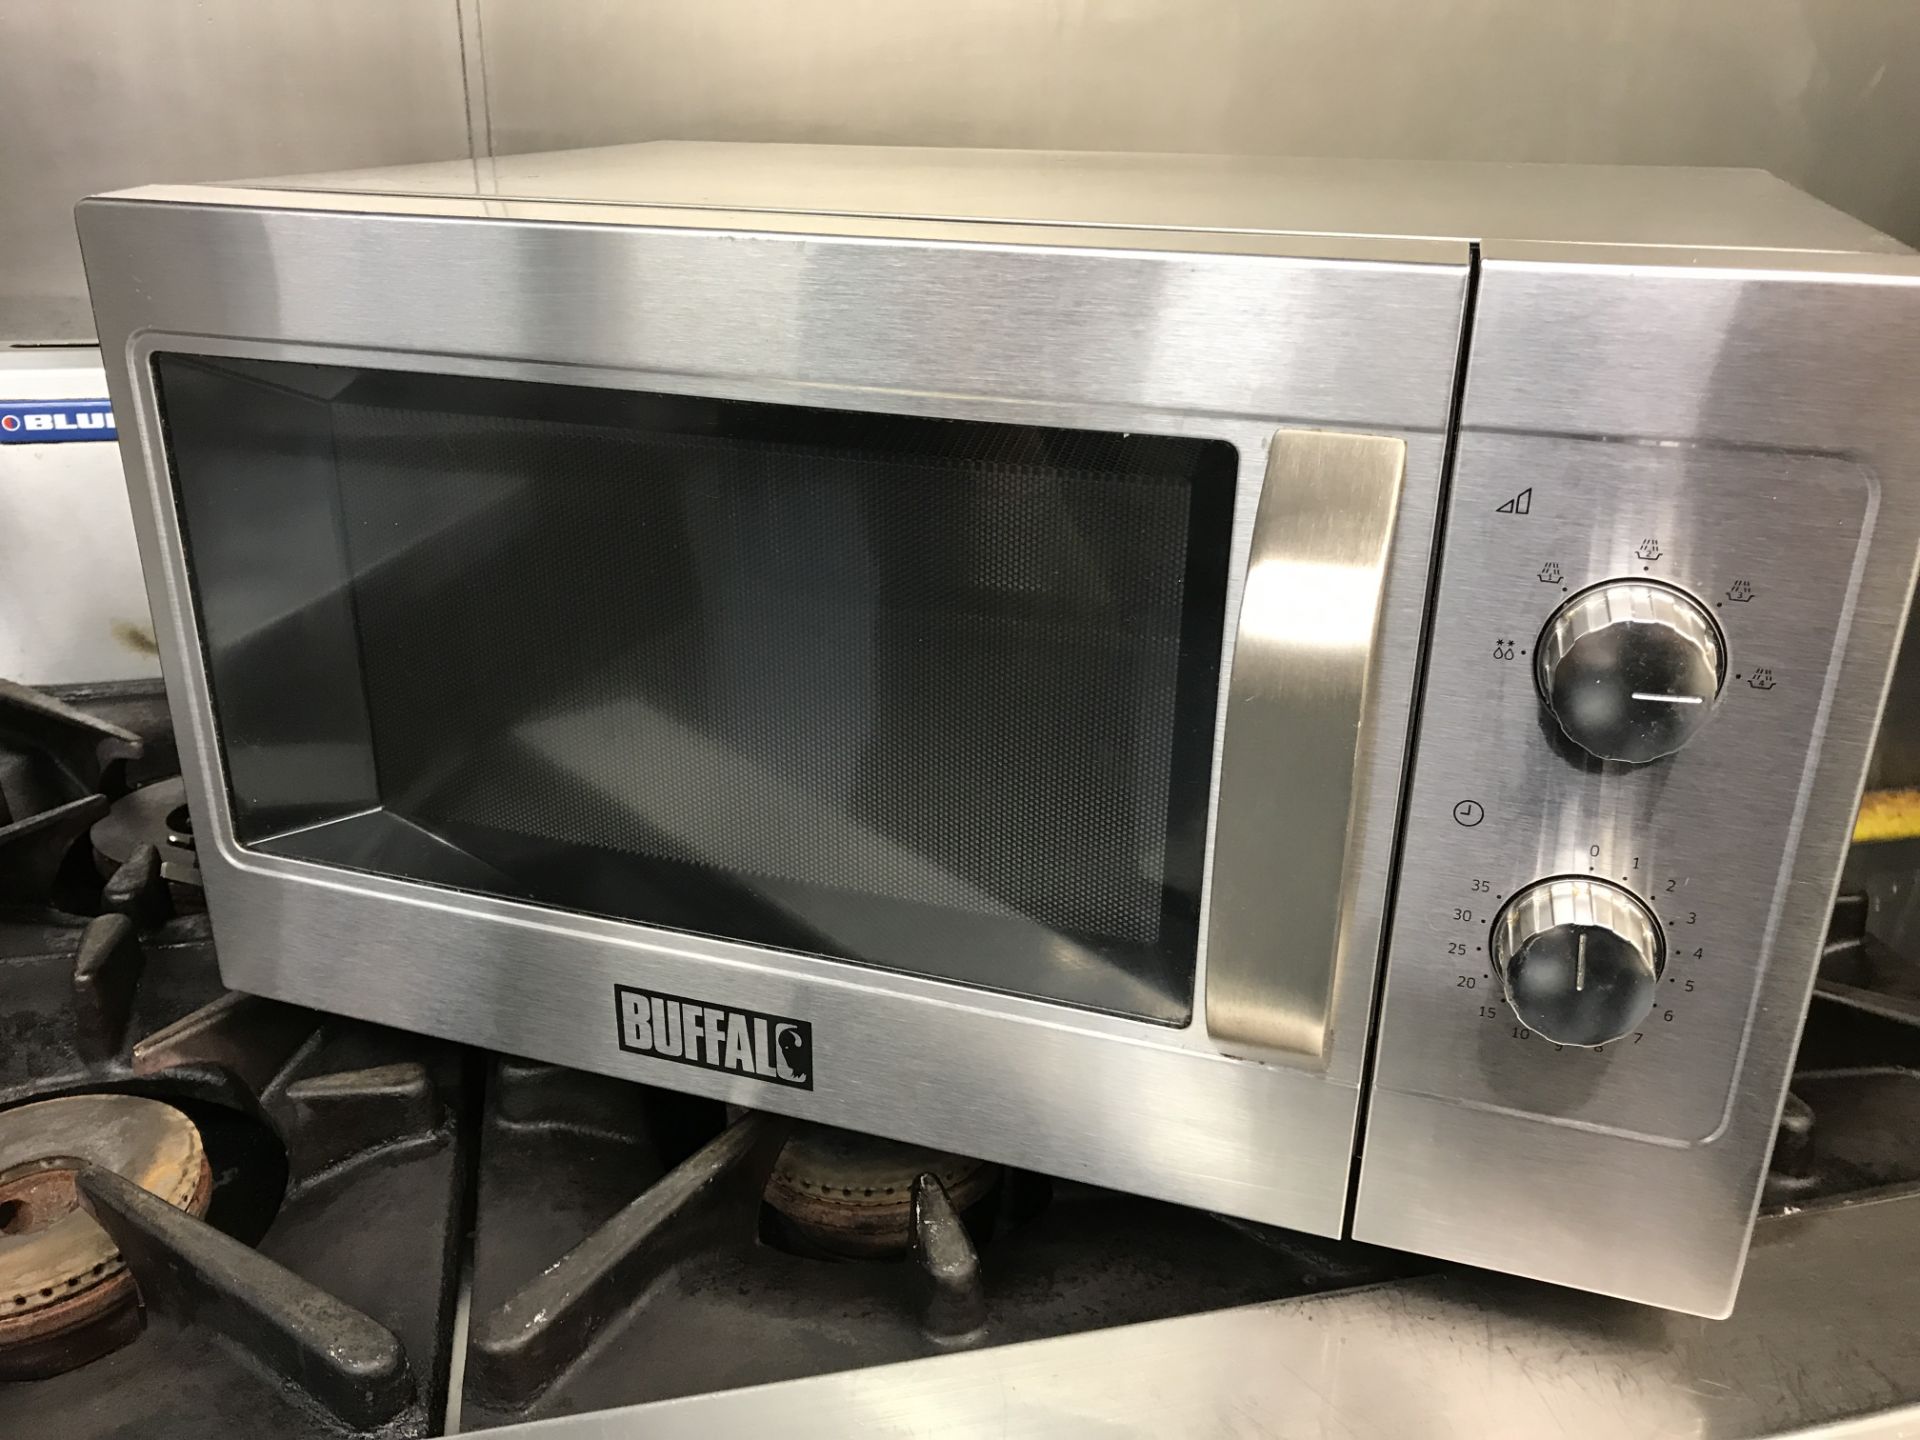 Buffalo 1.6kW GK643 commercial microwave oven